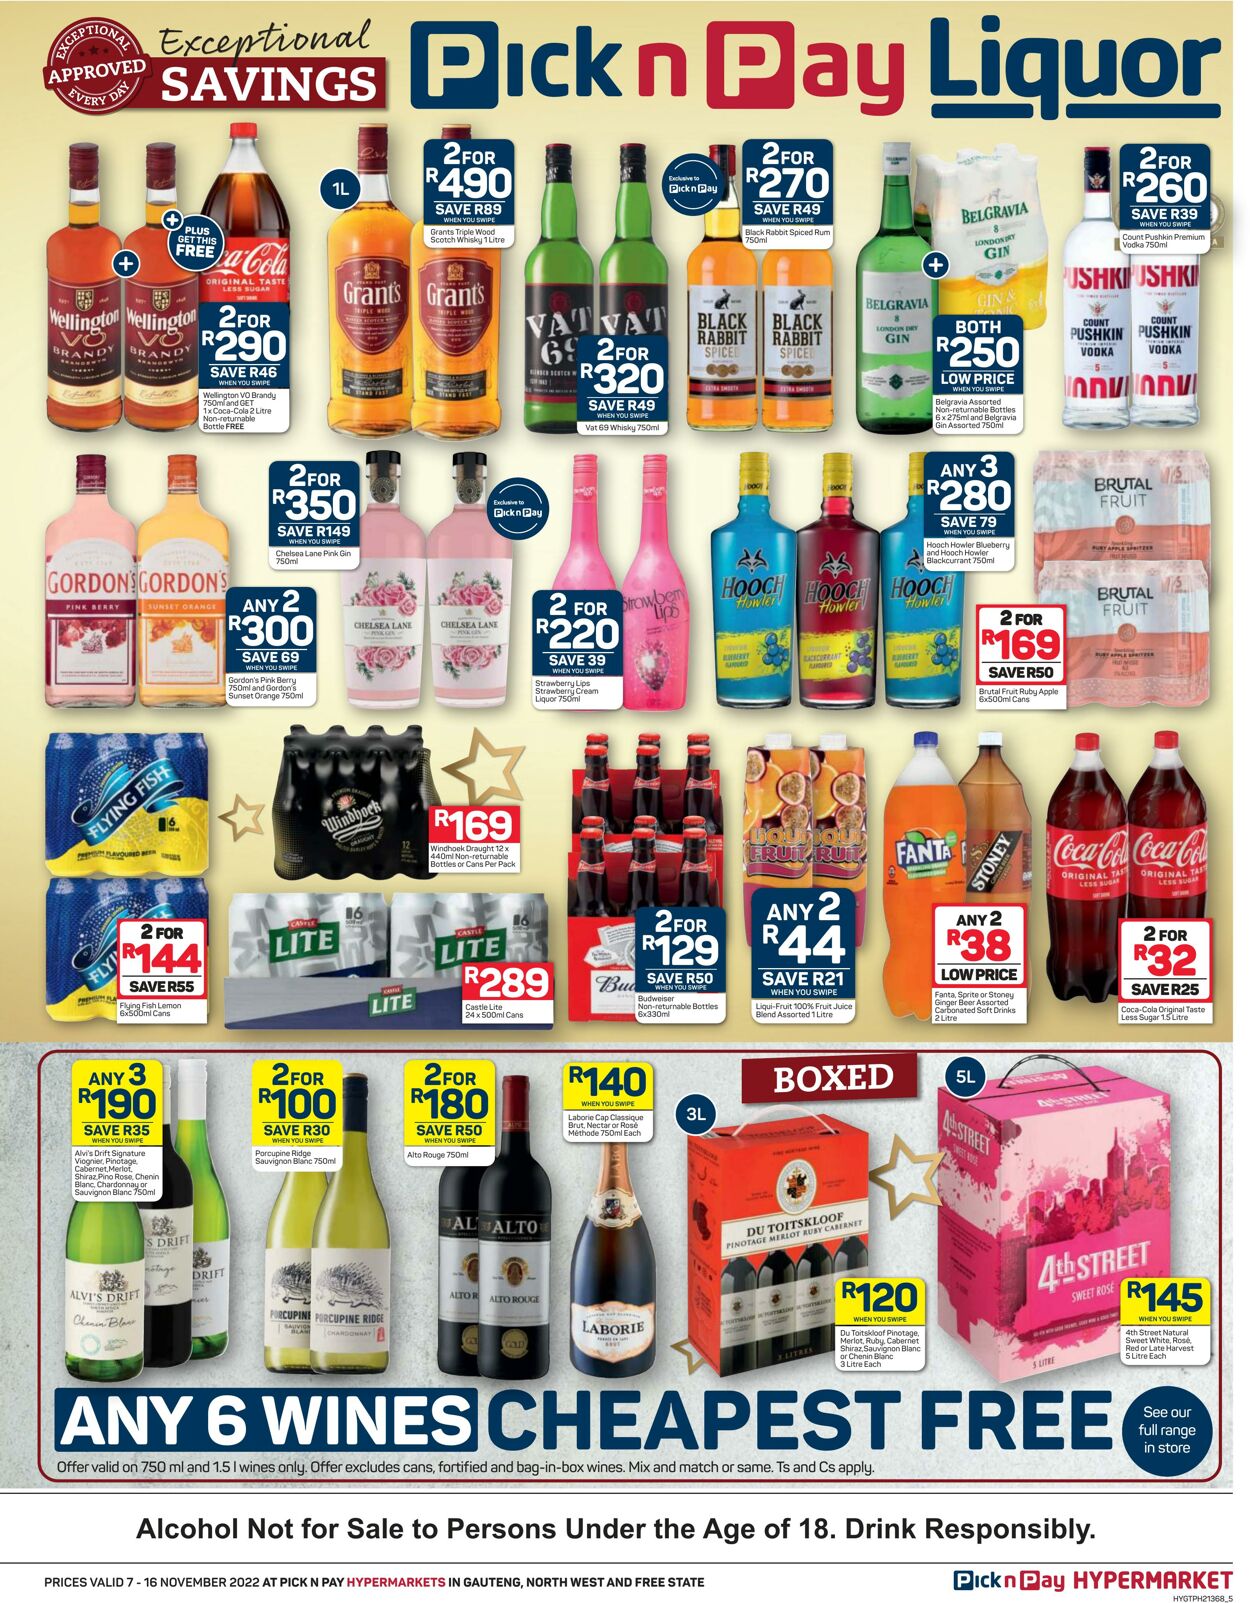 Pick n Pay Promotional Leaflet - Valid from 07.11 to 16.11 - Page nb 5 ...